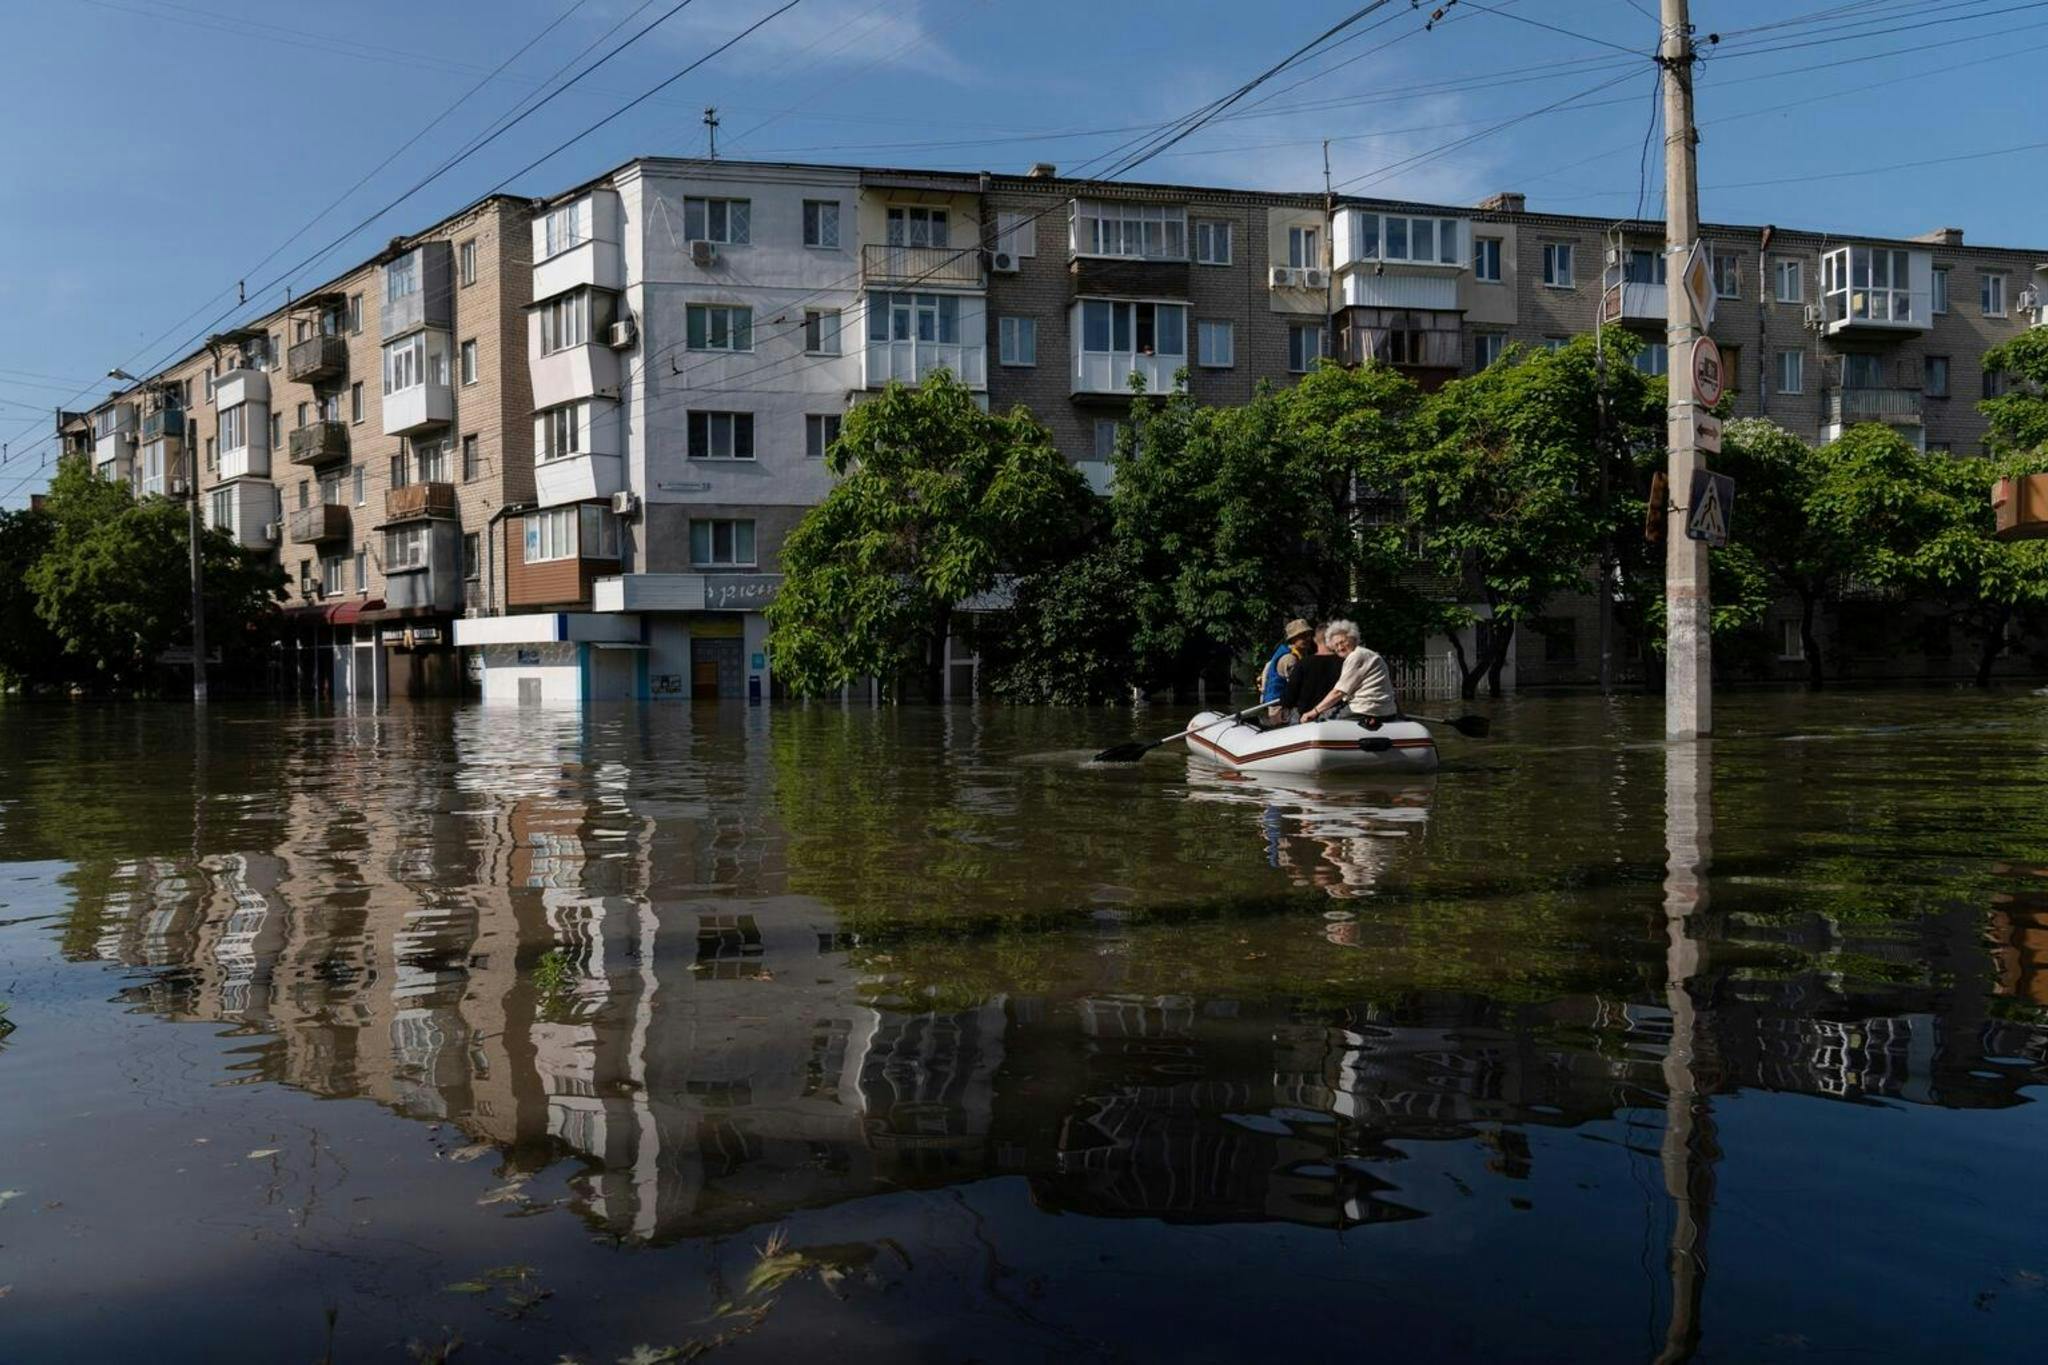 The streets in the central parts of Kherson were flooded up to 5 meters in some places.